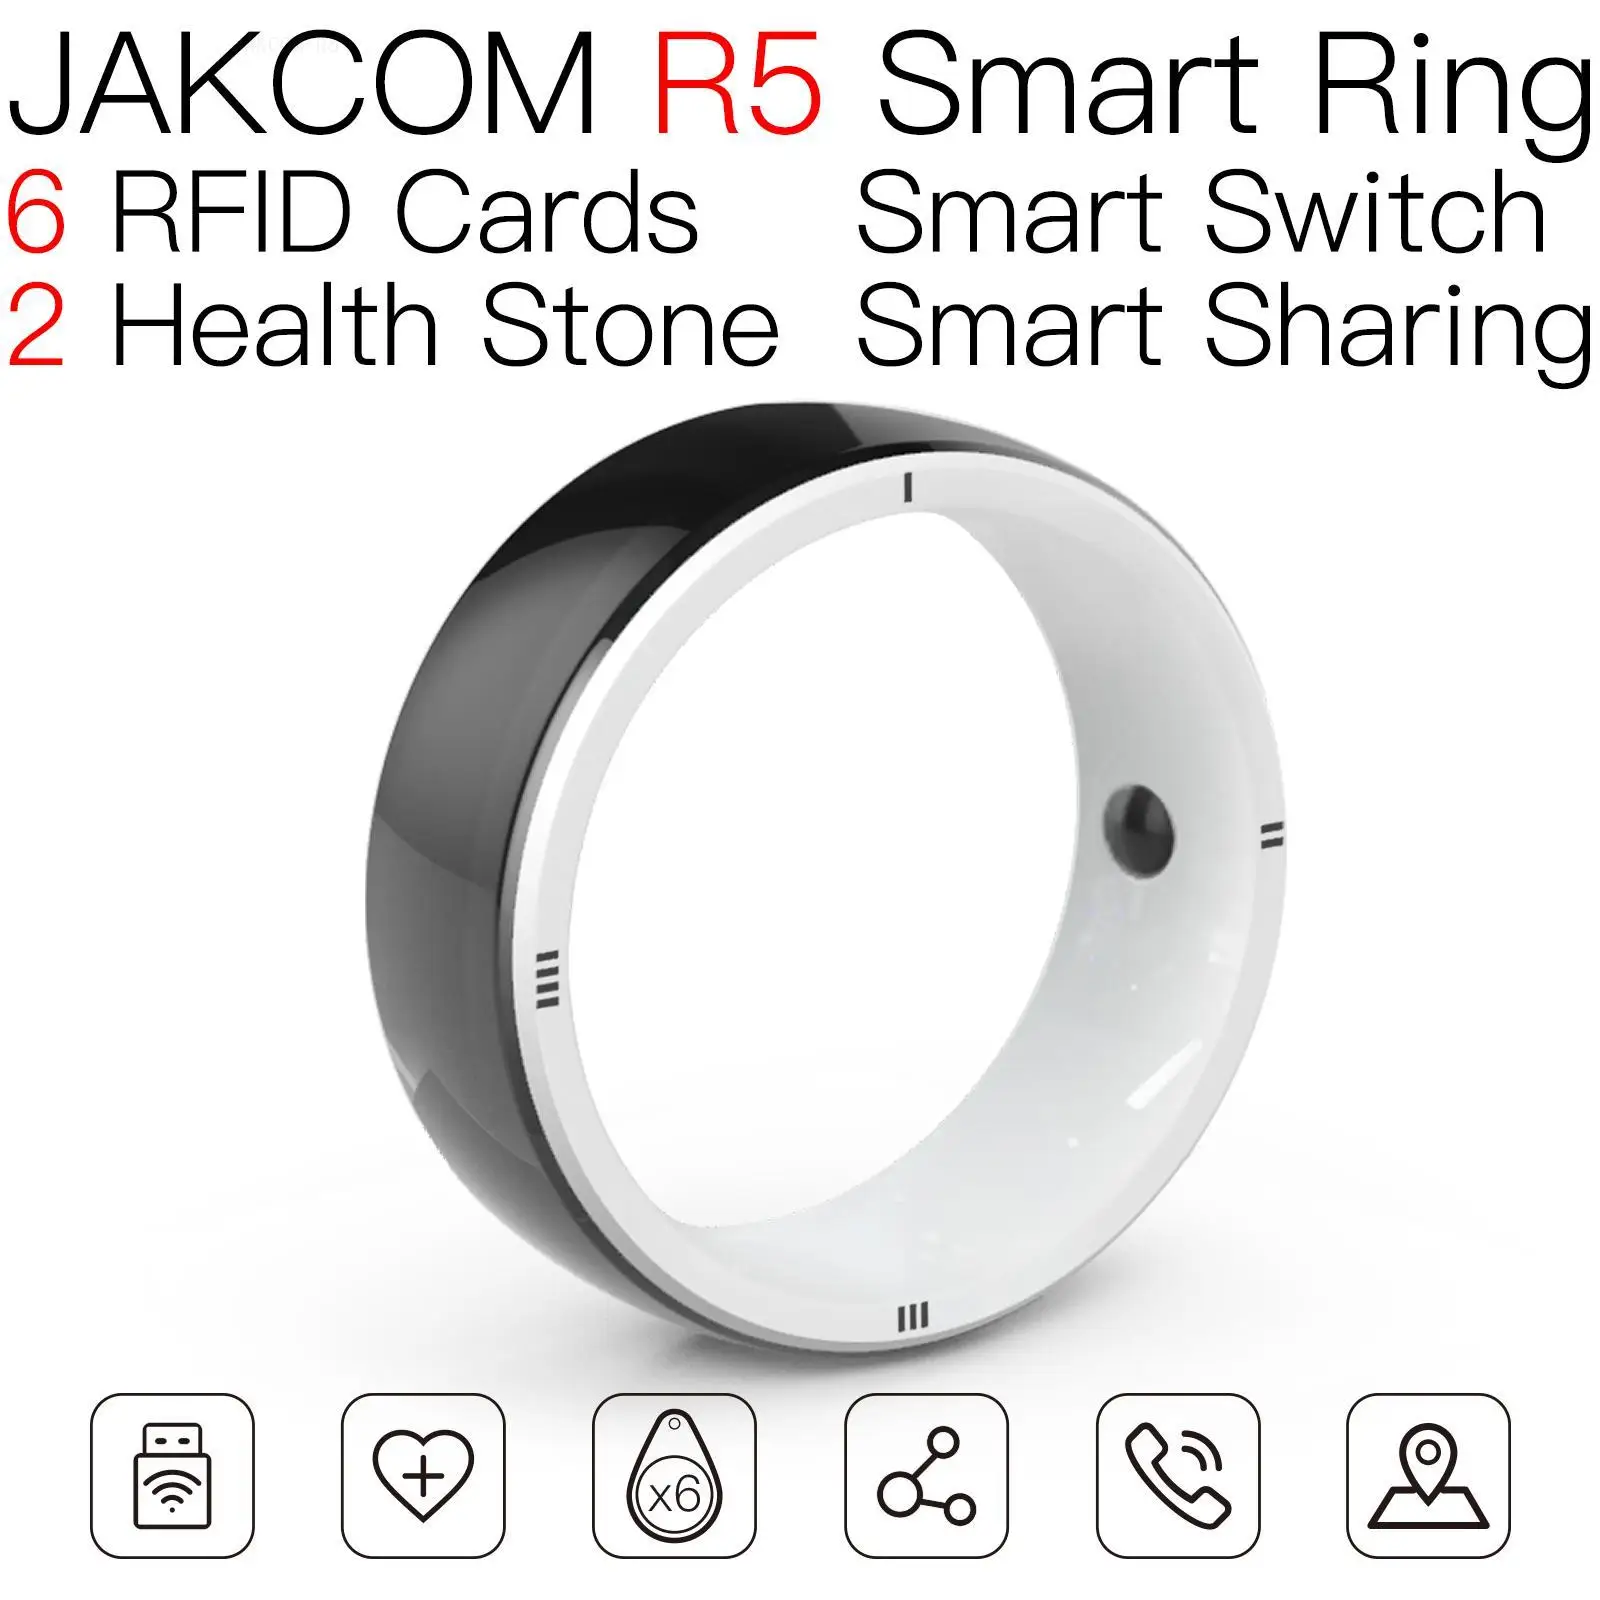 

JAKCOM R5 Smart Ring Super value than nfc copy cat animal tracking chip waterproof label writable bamboo card microchipped tag